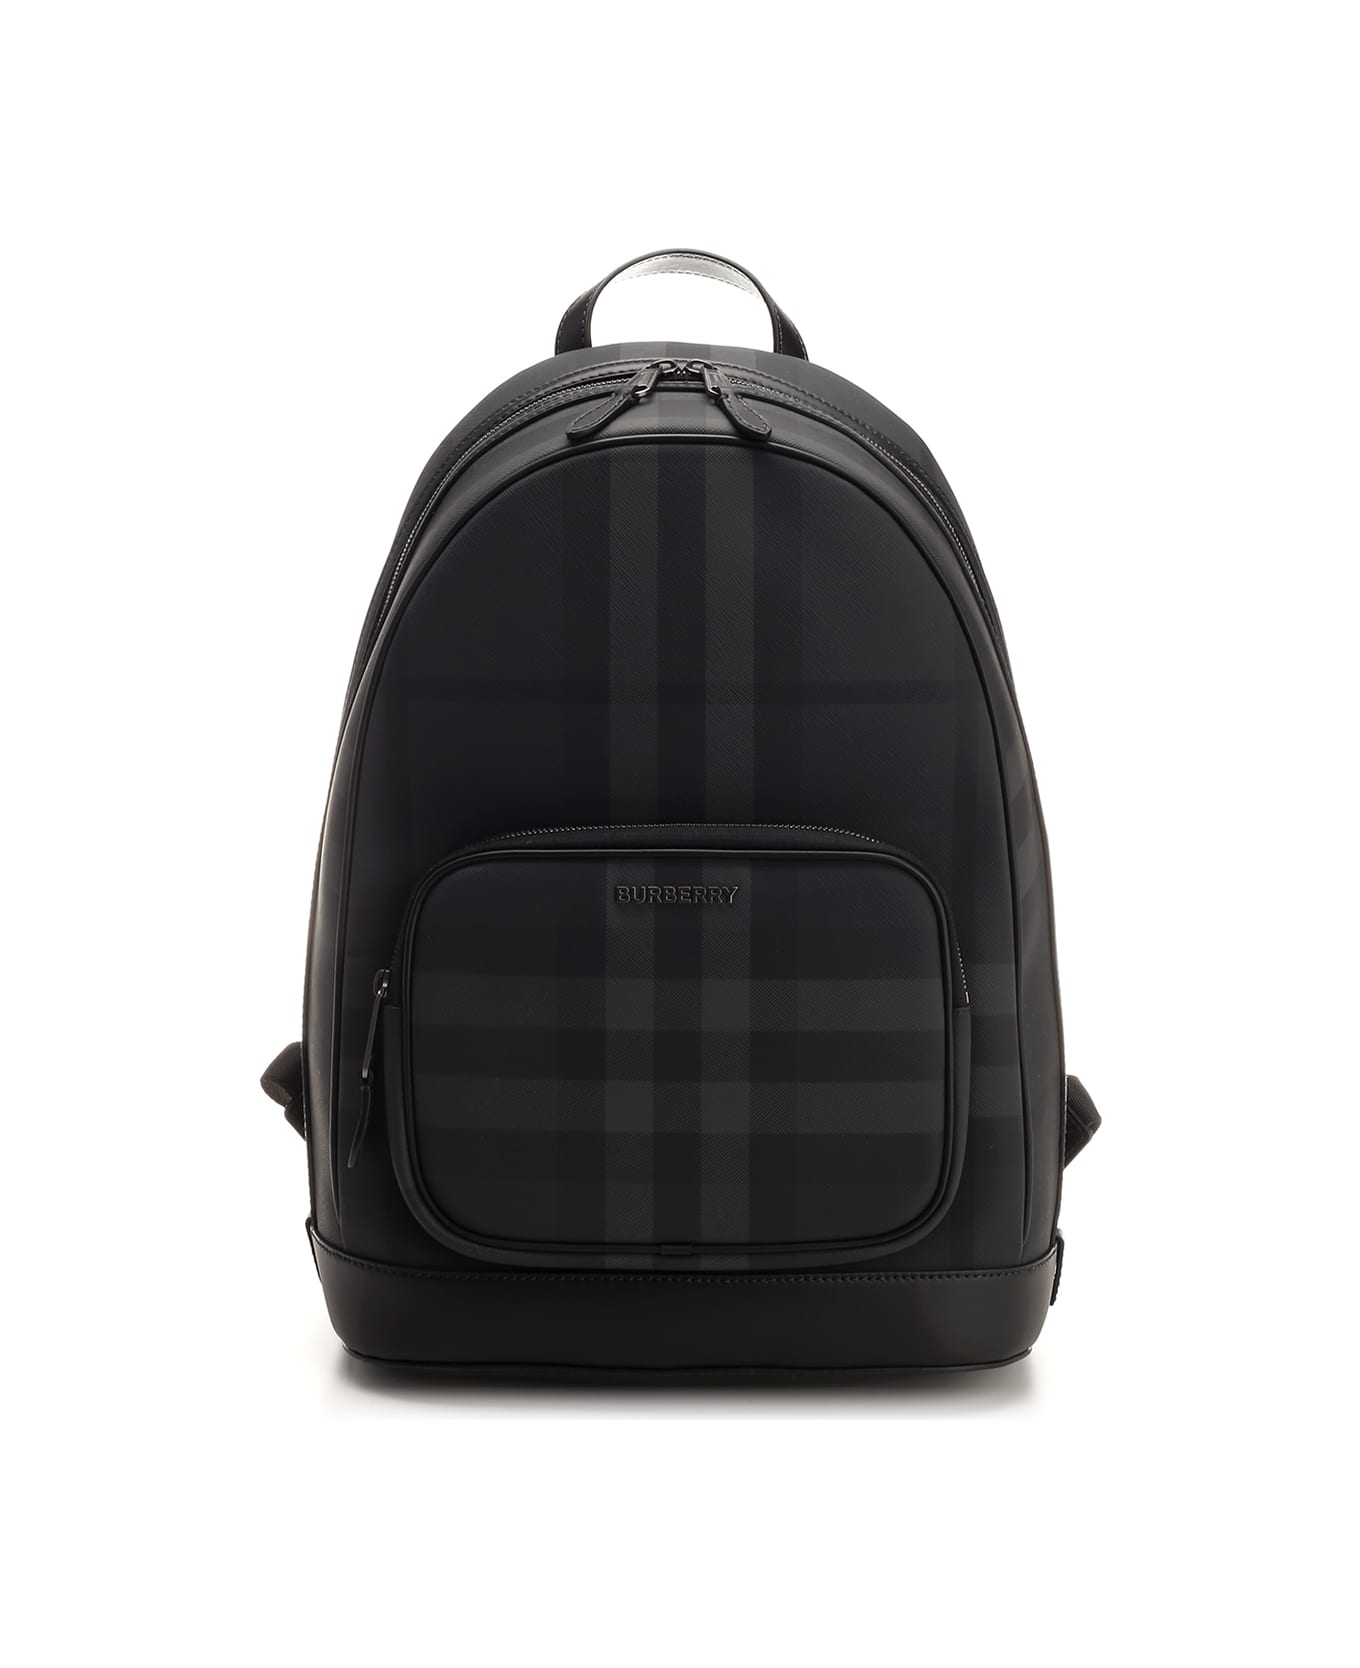 Burberry Check Backpack - Grey